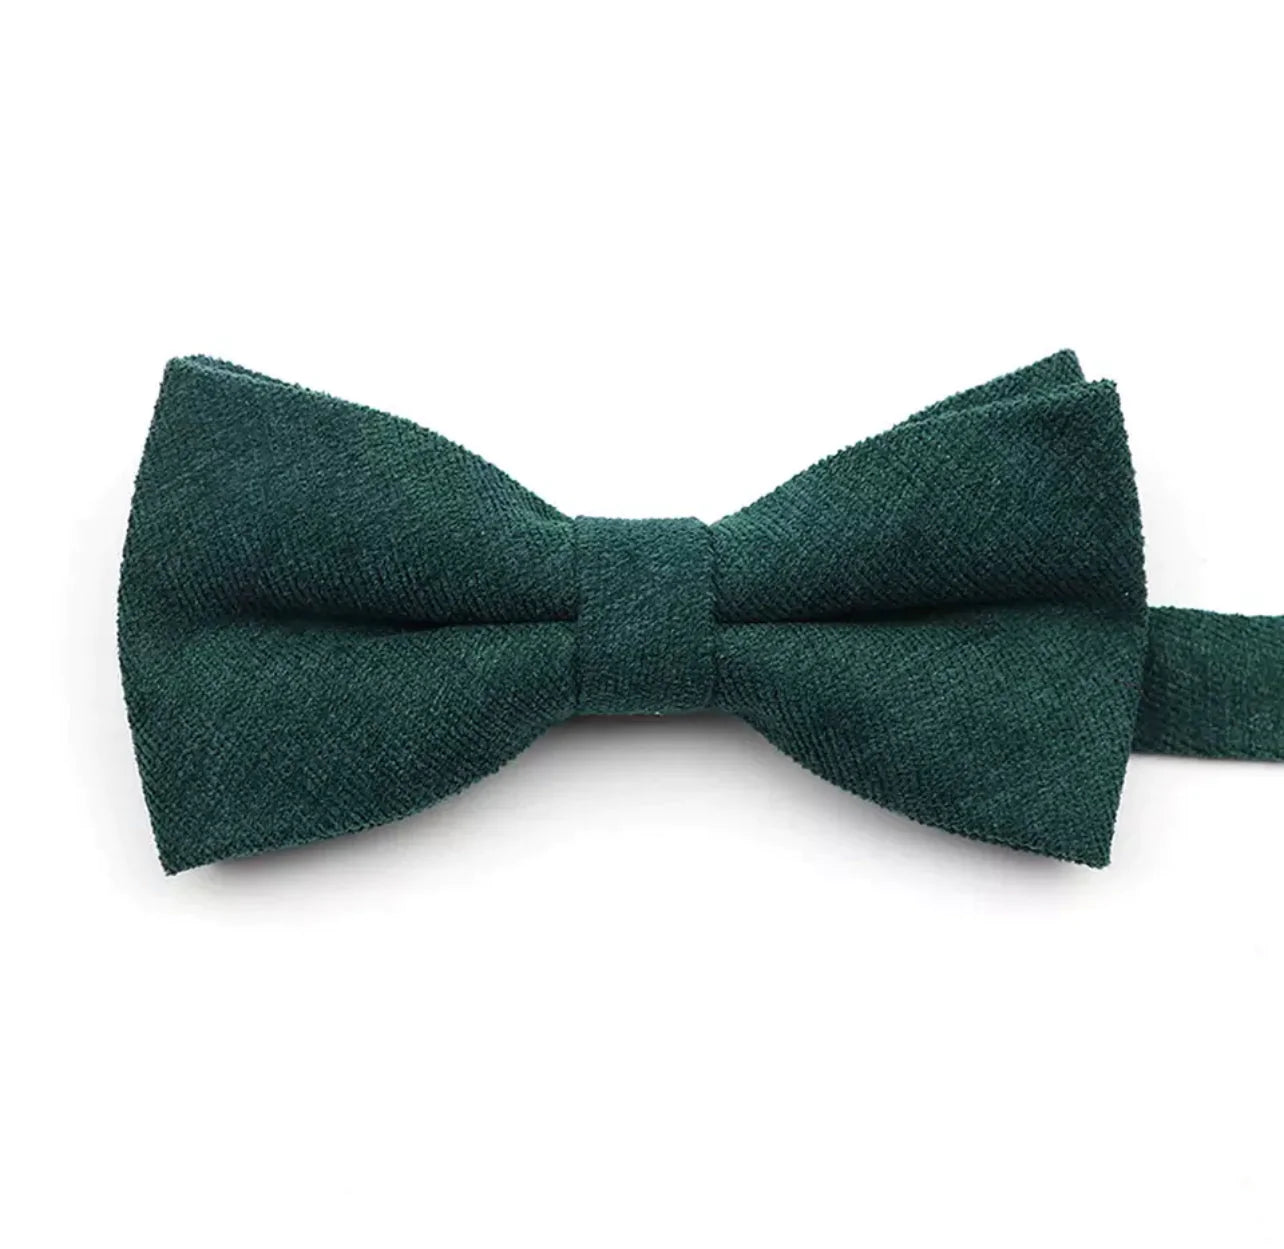 Hunter Green Bow Tie (Pretied) for Adults - OLIVER by MYTIESHOP-Hunter Green Bow Tie (Pretied) for AdultsStrap is Adjustable - 32CM Long (10-18 Inches)Pre-Tied bowtieBow Tie 12CM * 6CMMade from Cotton Great for Weddings Events Family Shoots Styled Shoots Wedding Photography Walking in weddings Mens Bow Tie great for weddings and events. Great for the Groom and Groomsmen to wear at the wedding. Serves as a great gift idea; for anniversaries or wedding presents. Looks great in styled shoots and we